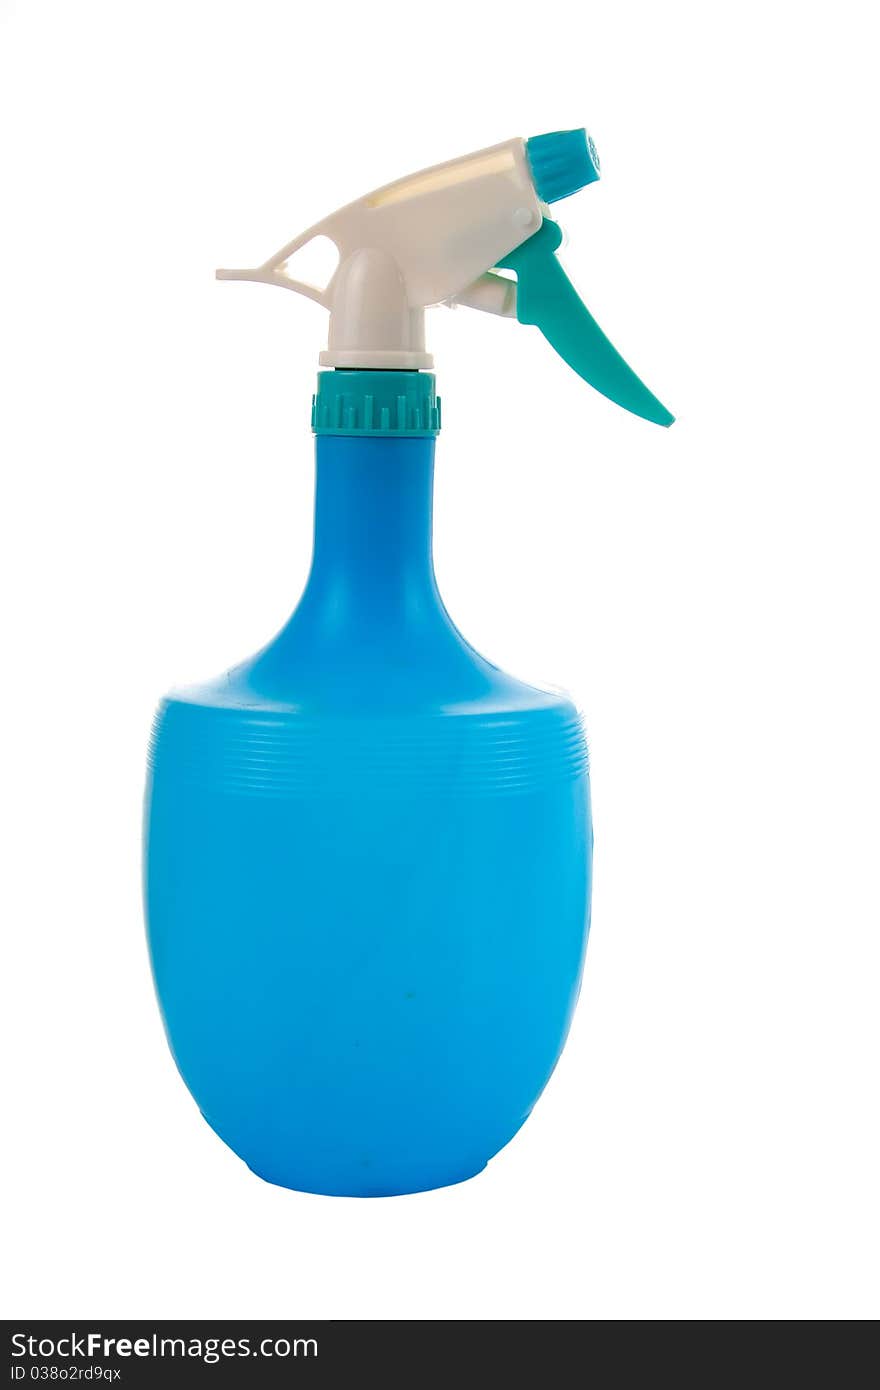 Spray bottle isolated on a white background